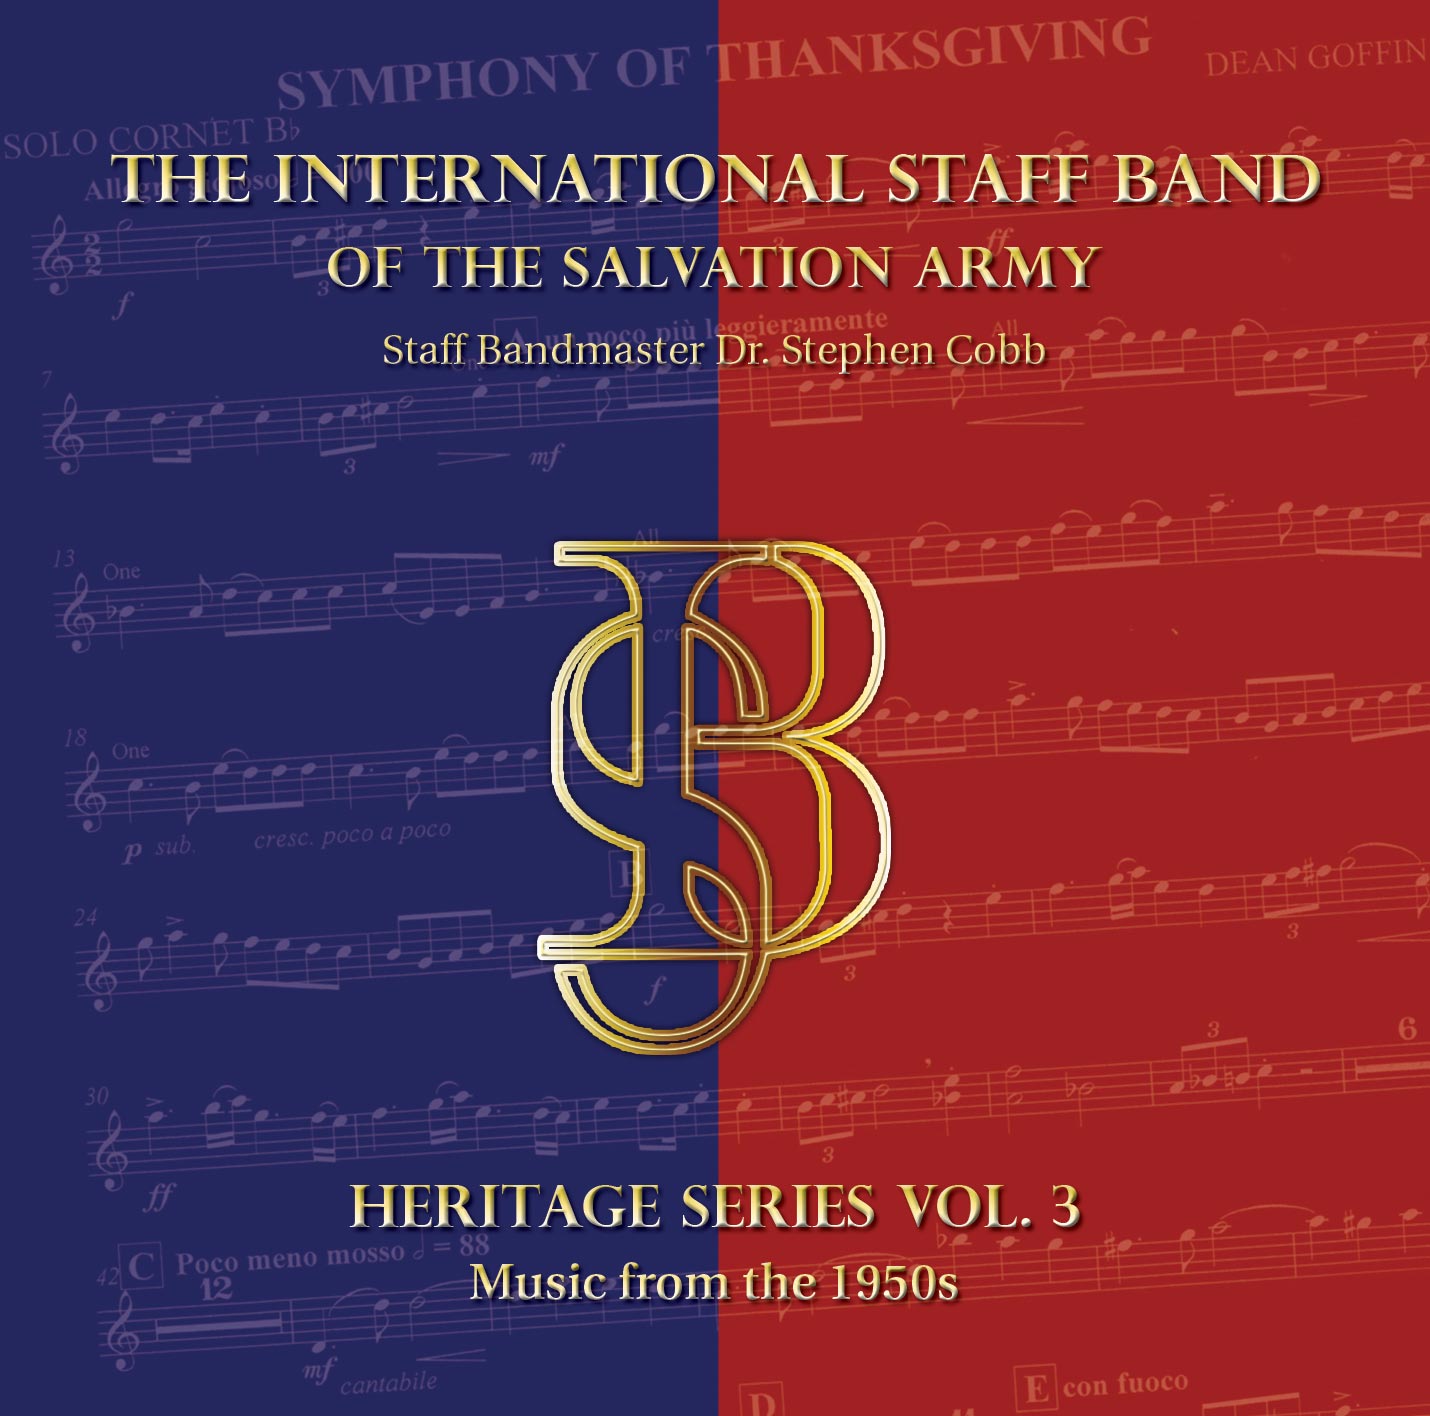 Heritage Series Vol. 3 - Music from the 1950s - Download